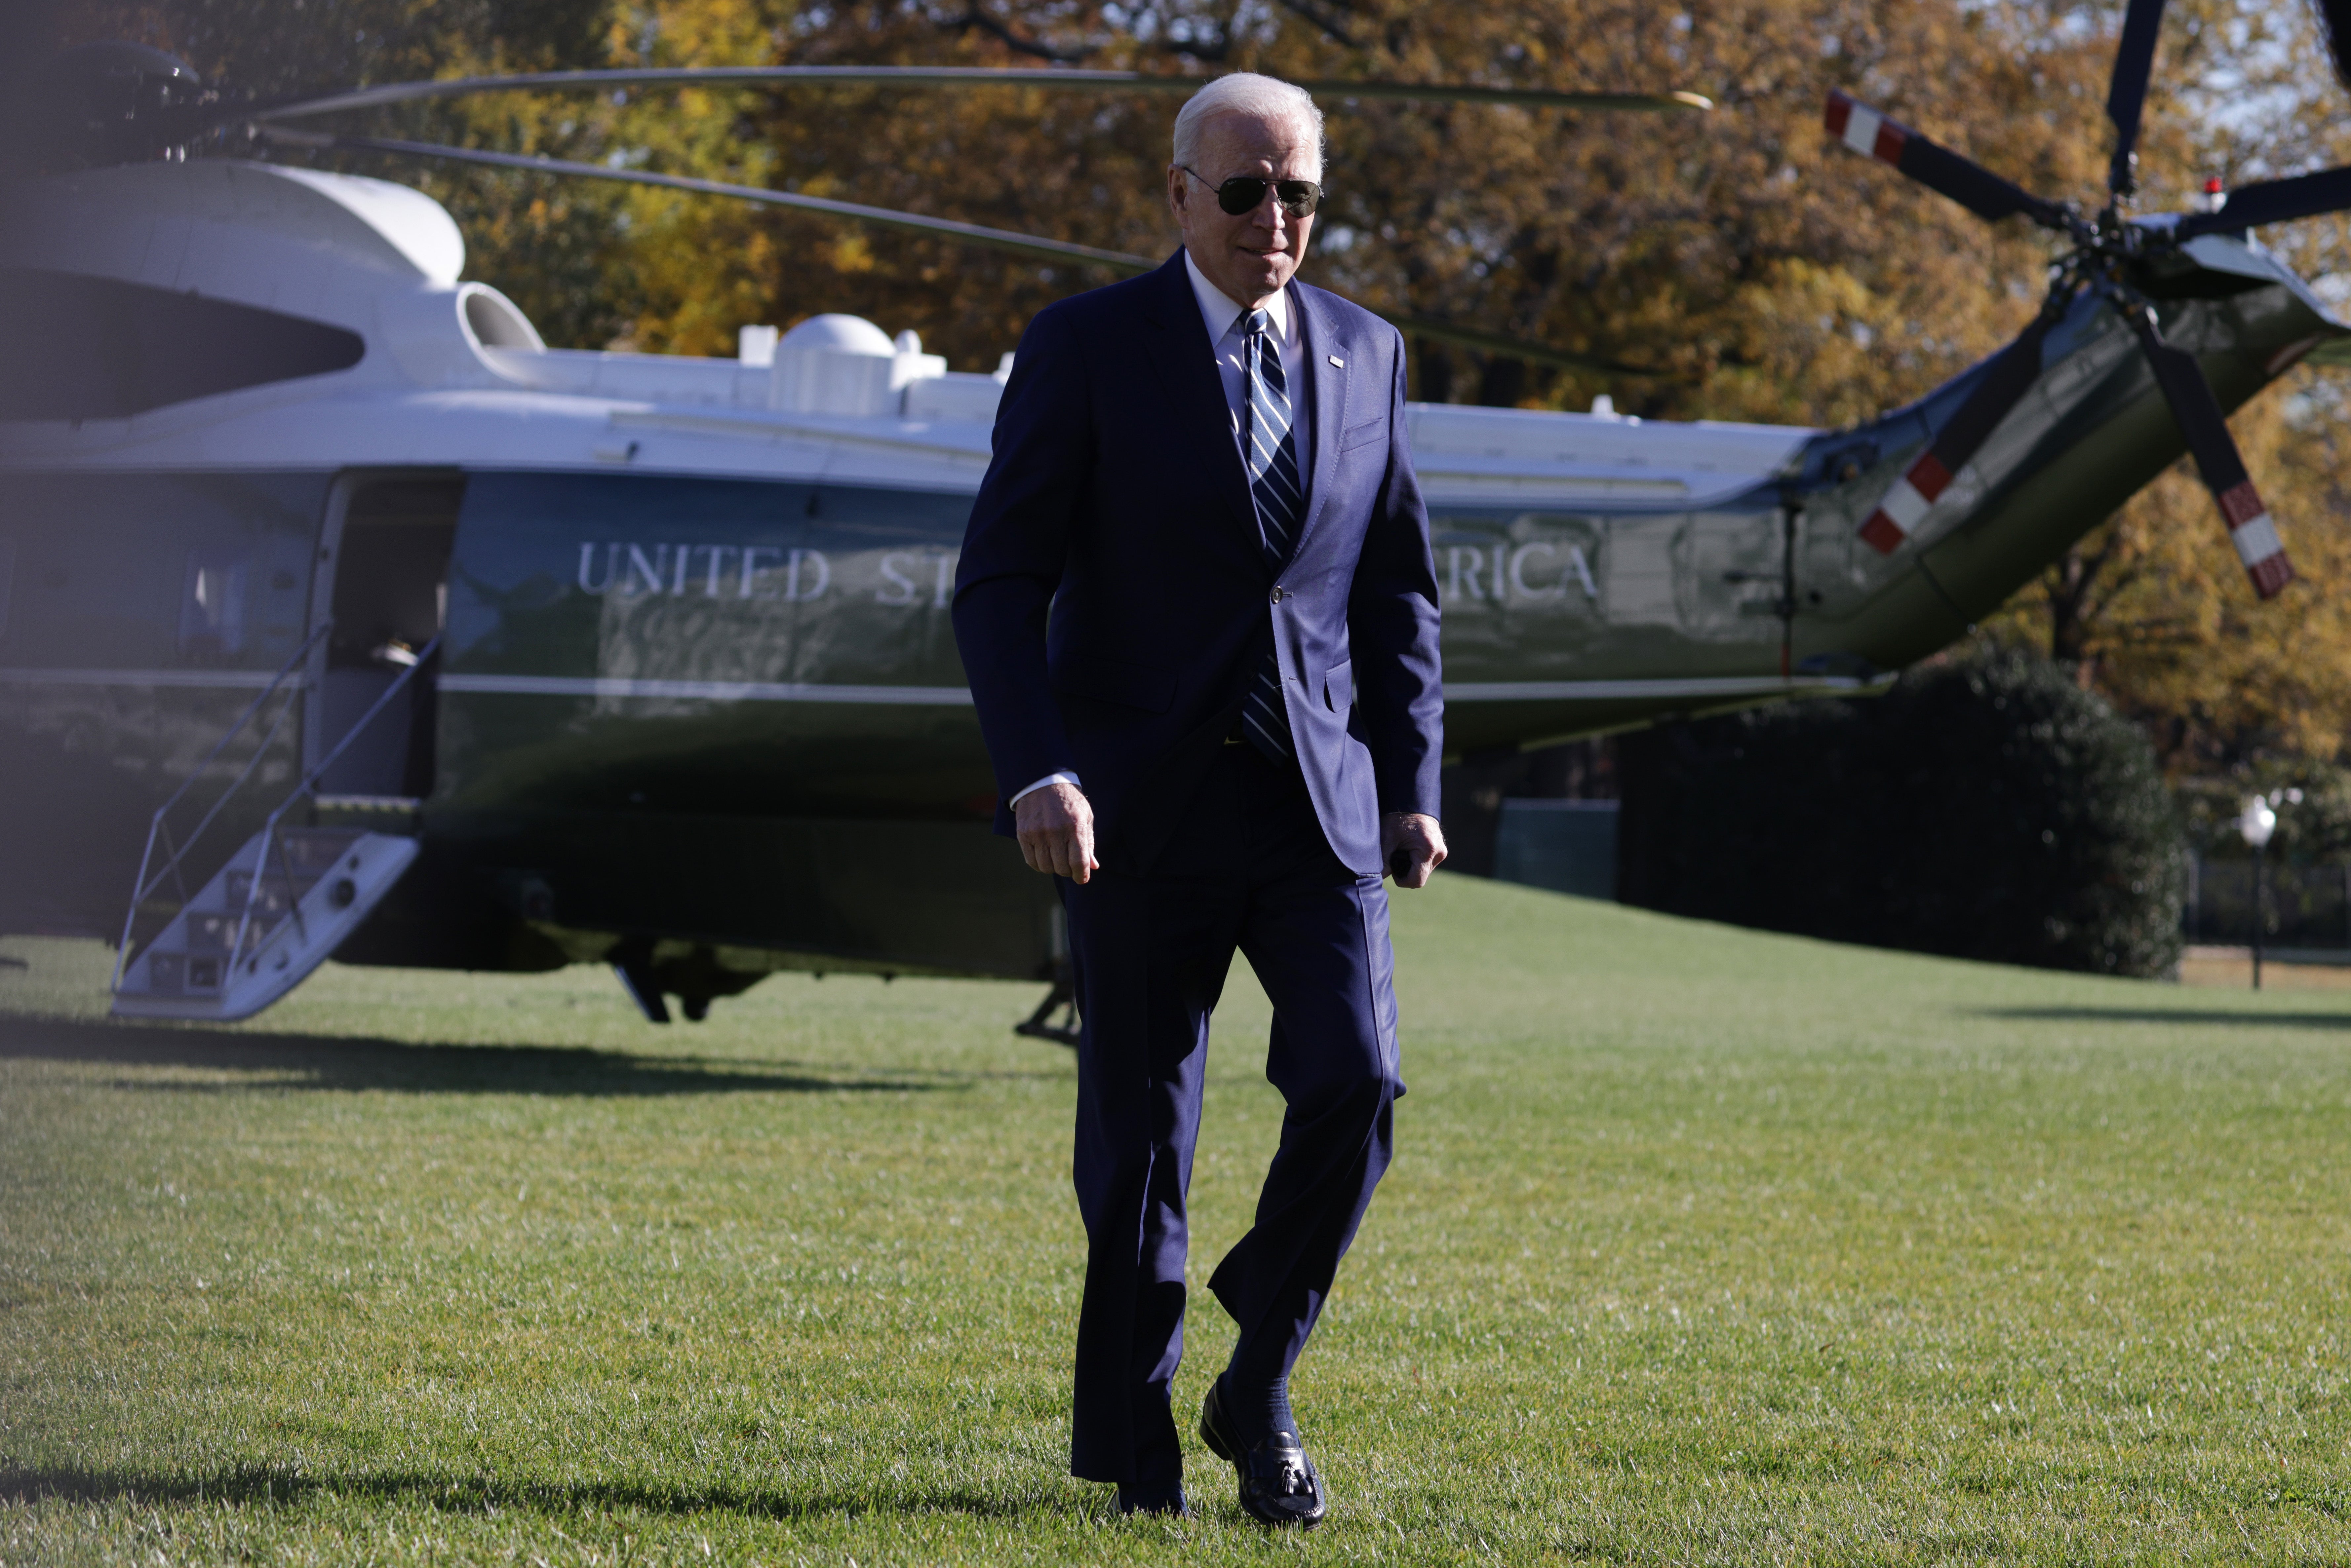 Recent initiatives have proved more popular among voters than Biden’s performance overall